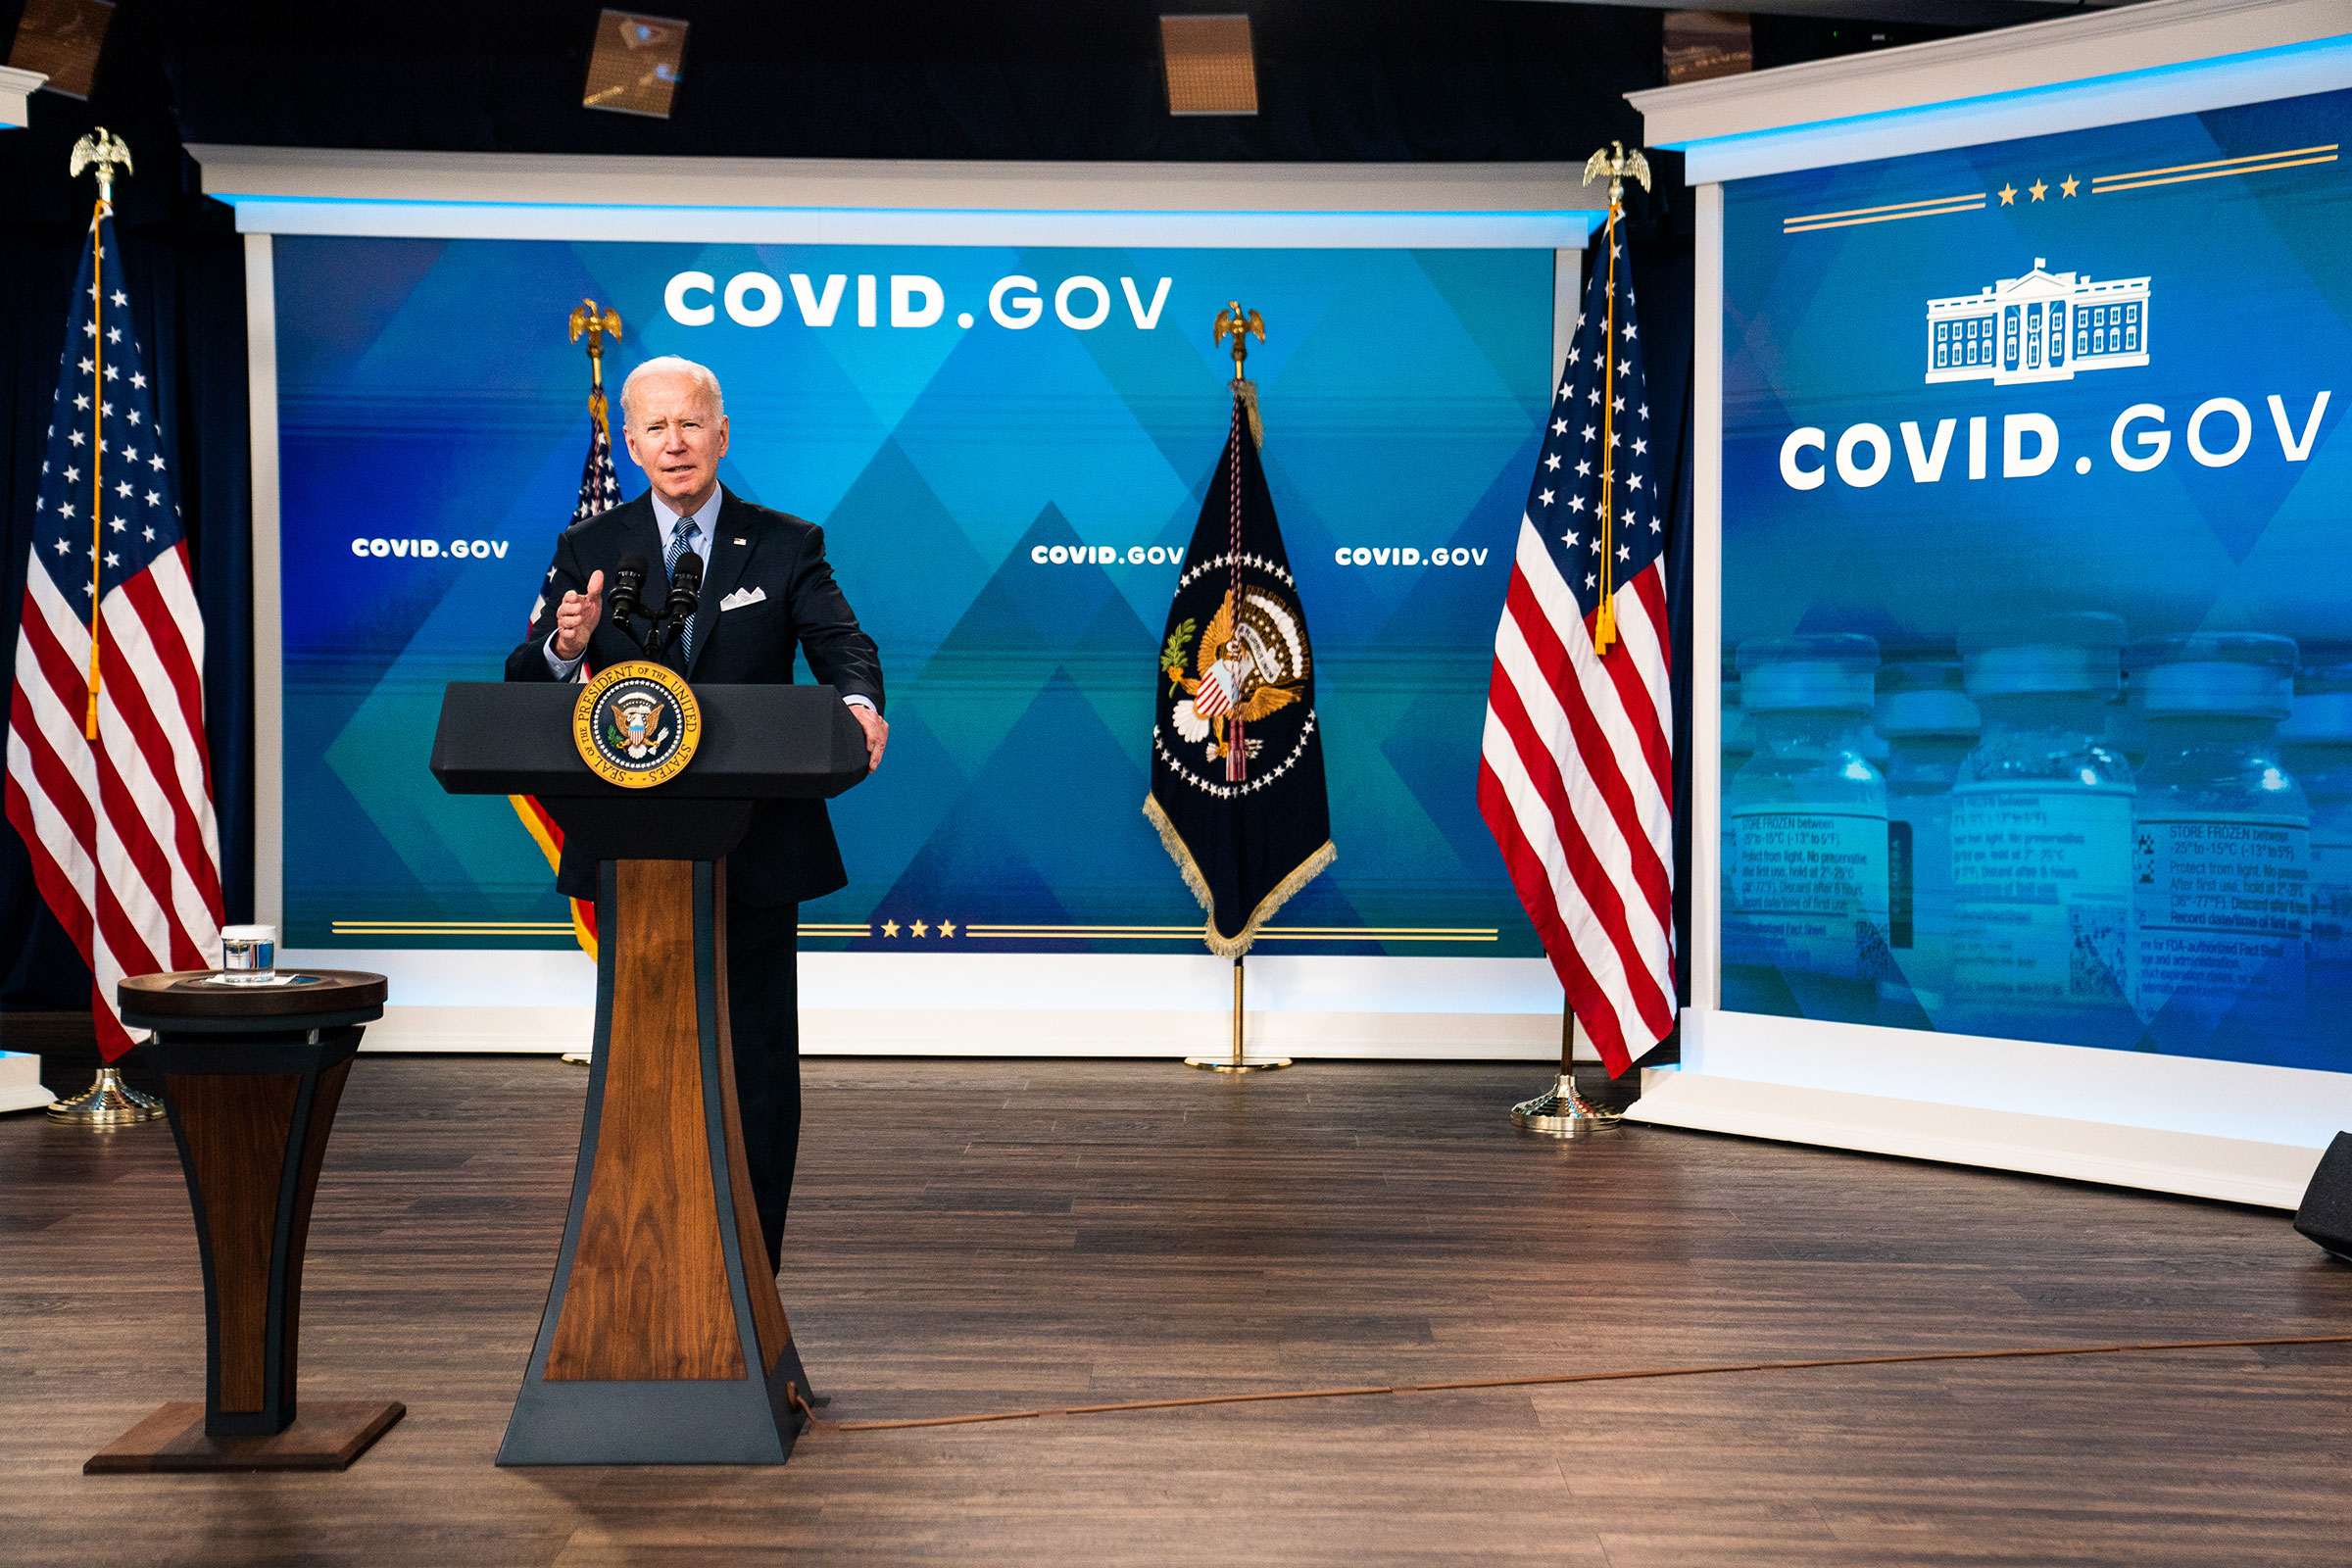 President Joe Biden delivers remarks regarding COVID-19 in the South Court Auditorium at the White House on March 30, 2022. (Demetrius Freeman—The Washington Post/Getty Images)